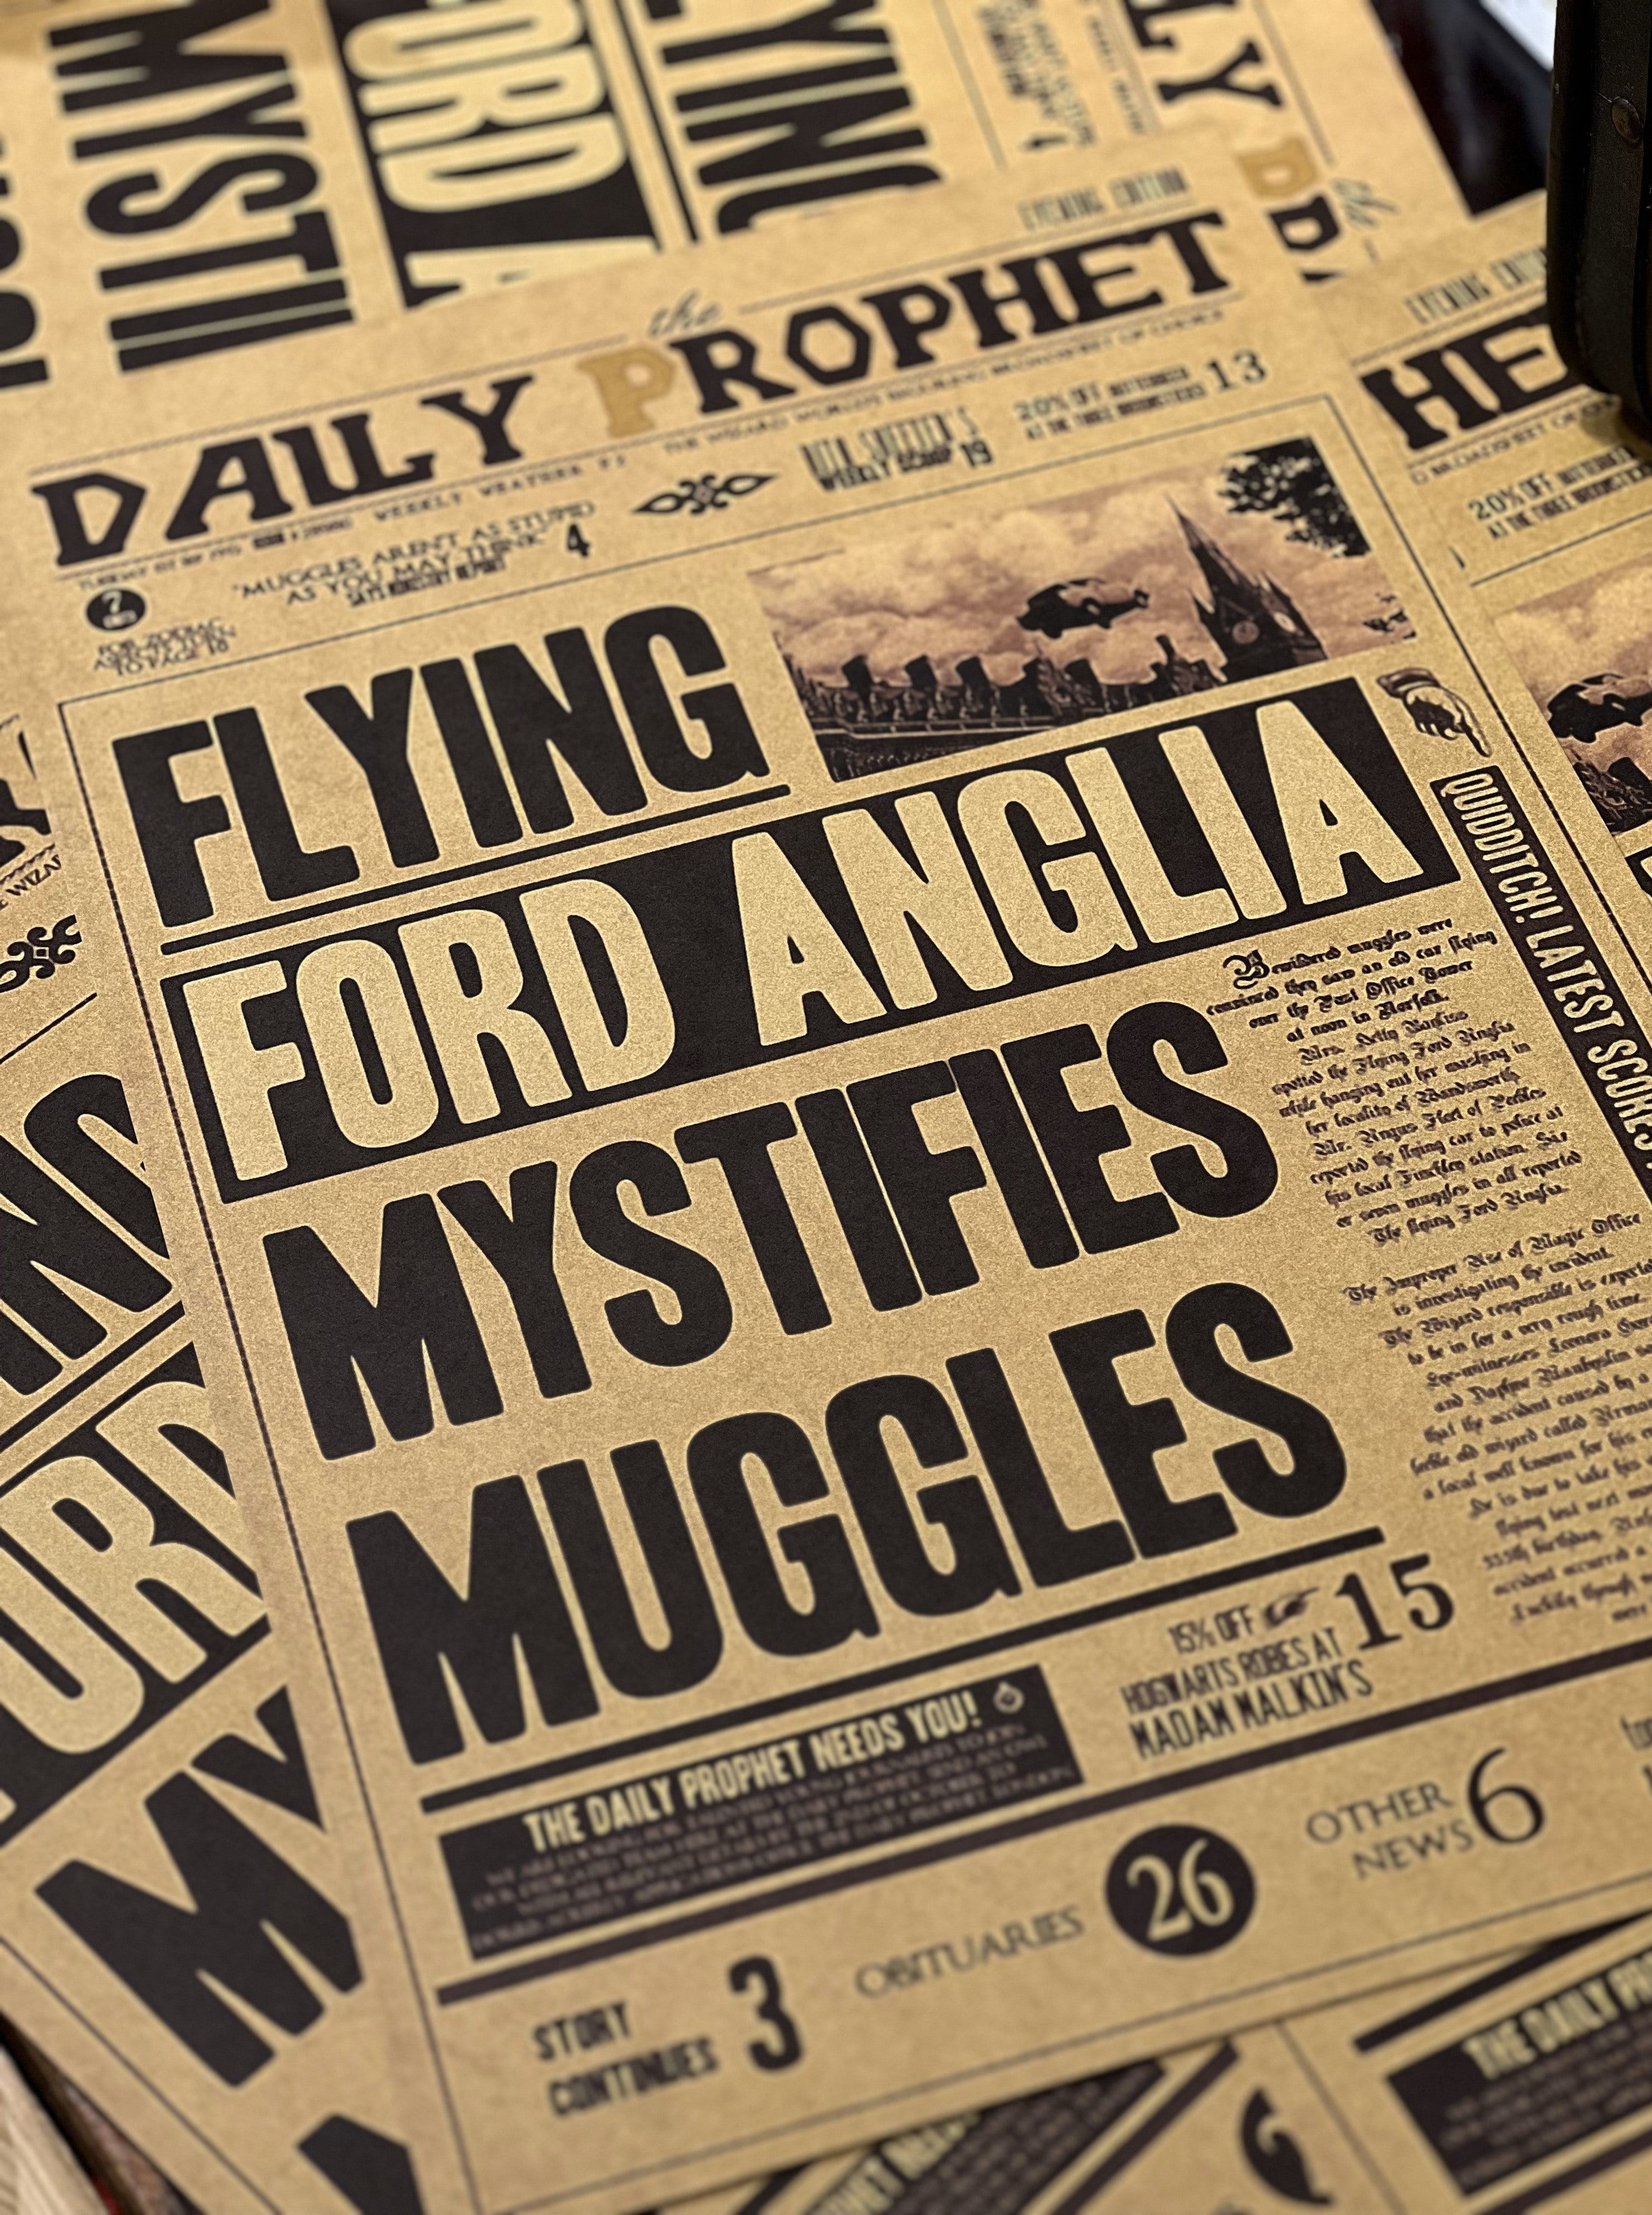 Morning Miss: A flying Ford Anglia amazes muggles